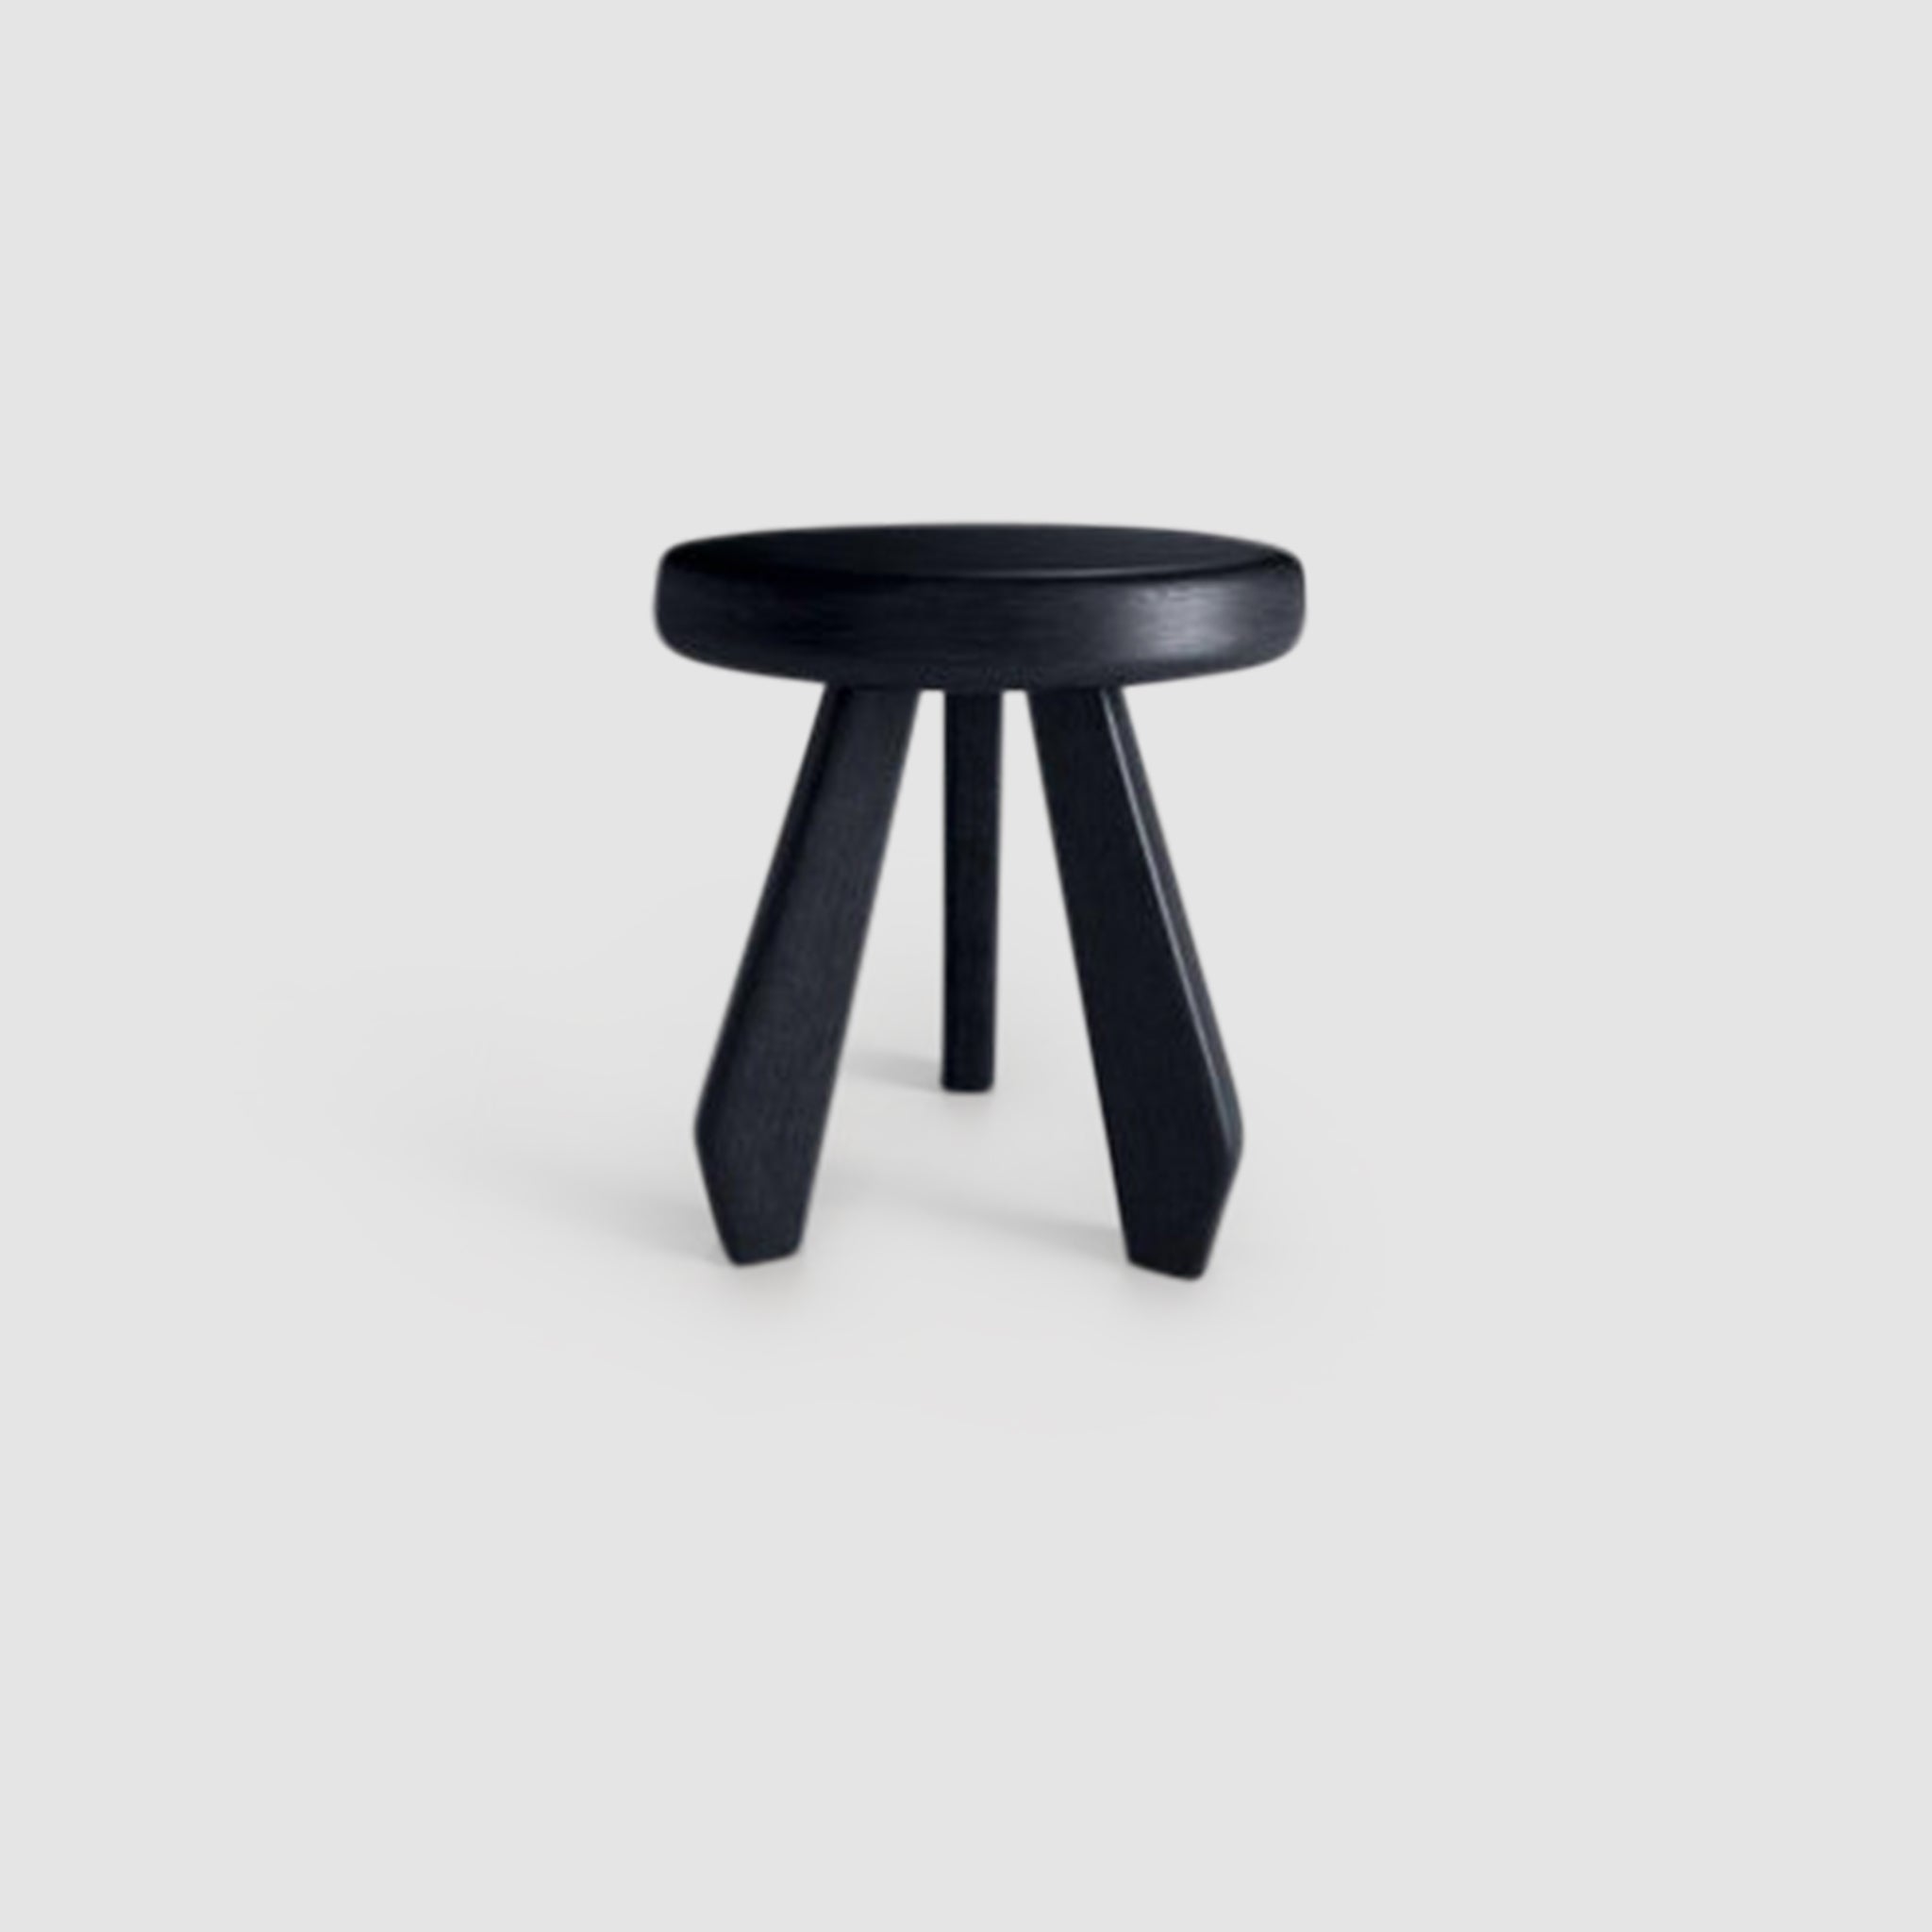 Black wooden three-legged stool with a round seat and tapered legs on a white background